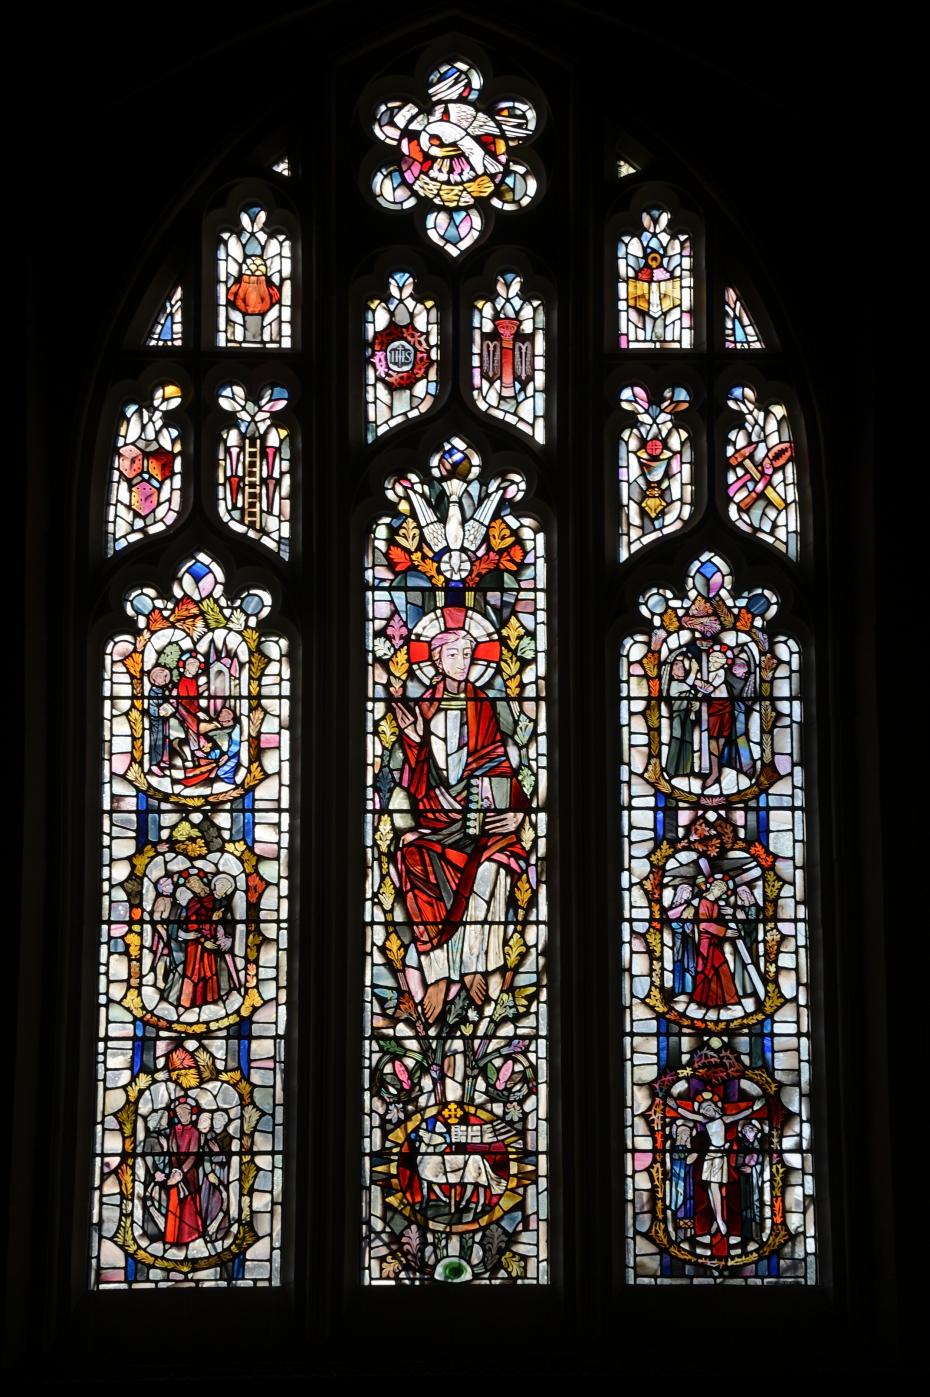 The stained glass window, photographed by Phil Mynott, 2015 (archive reference: GCPH 2/4/16).